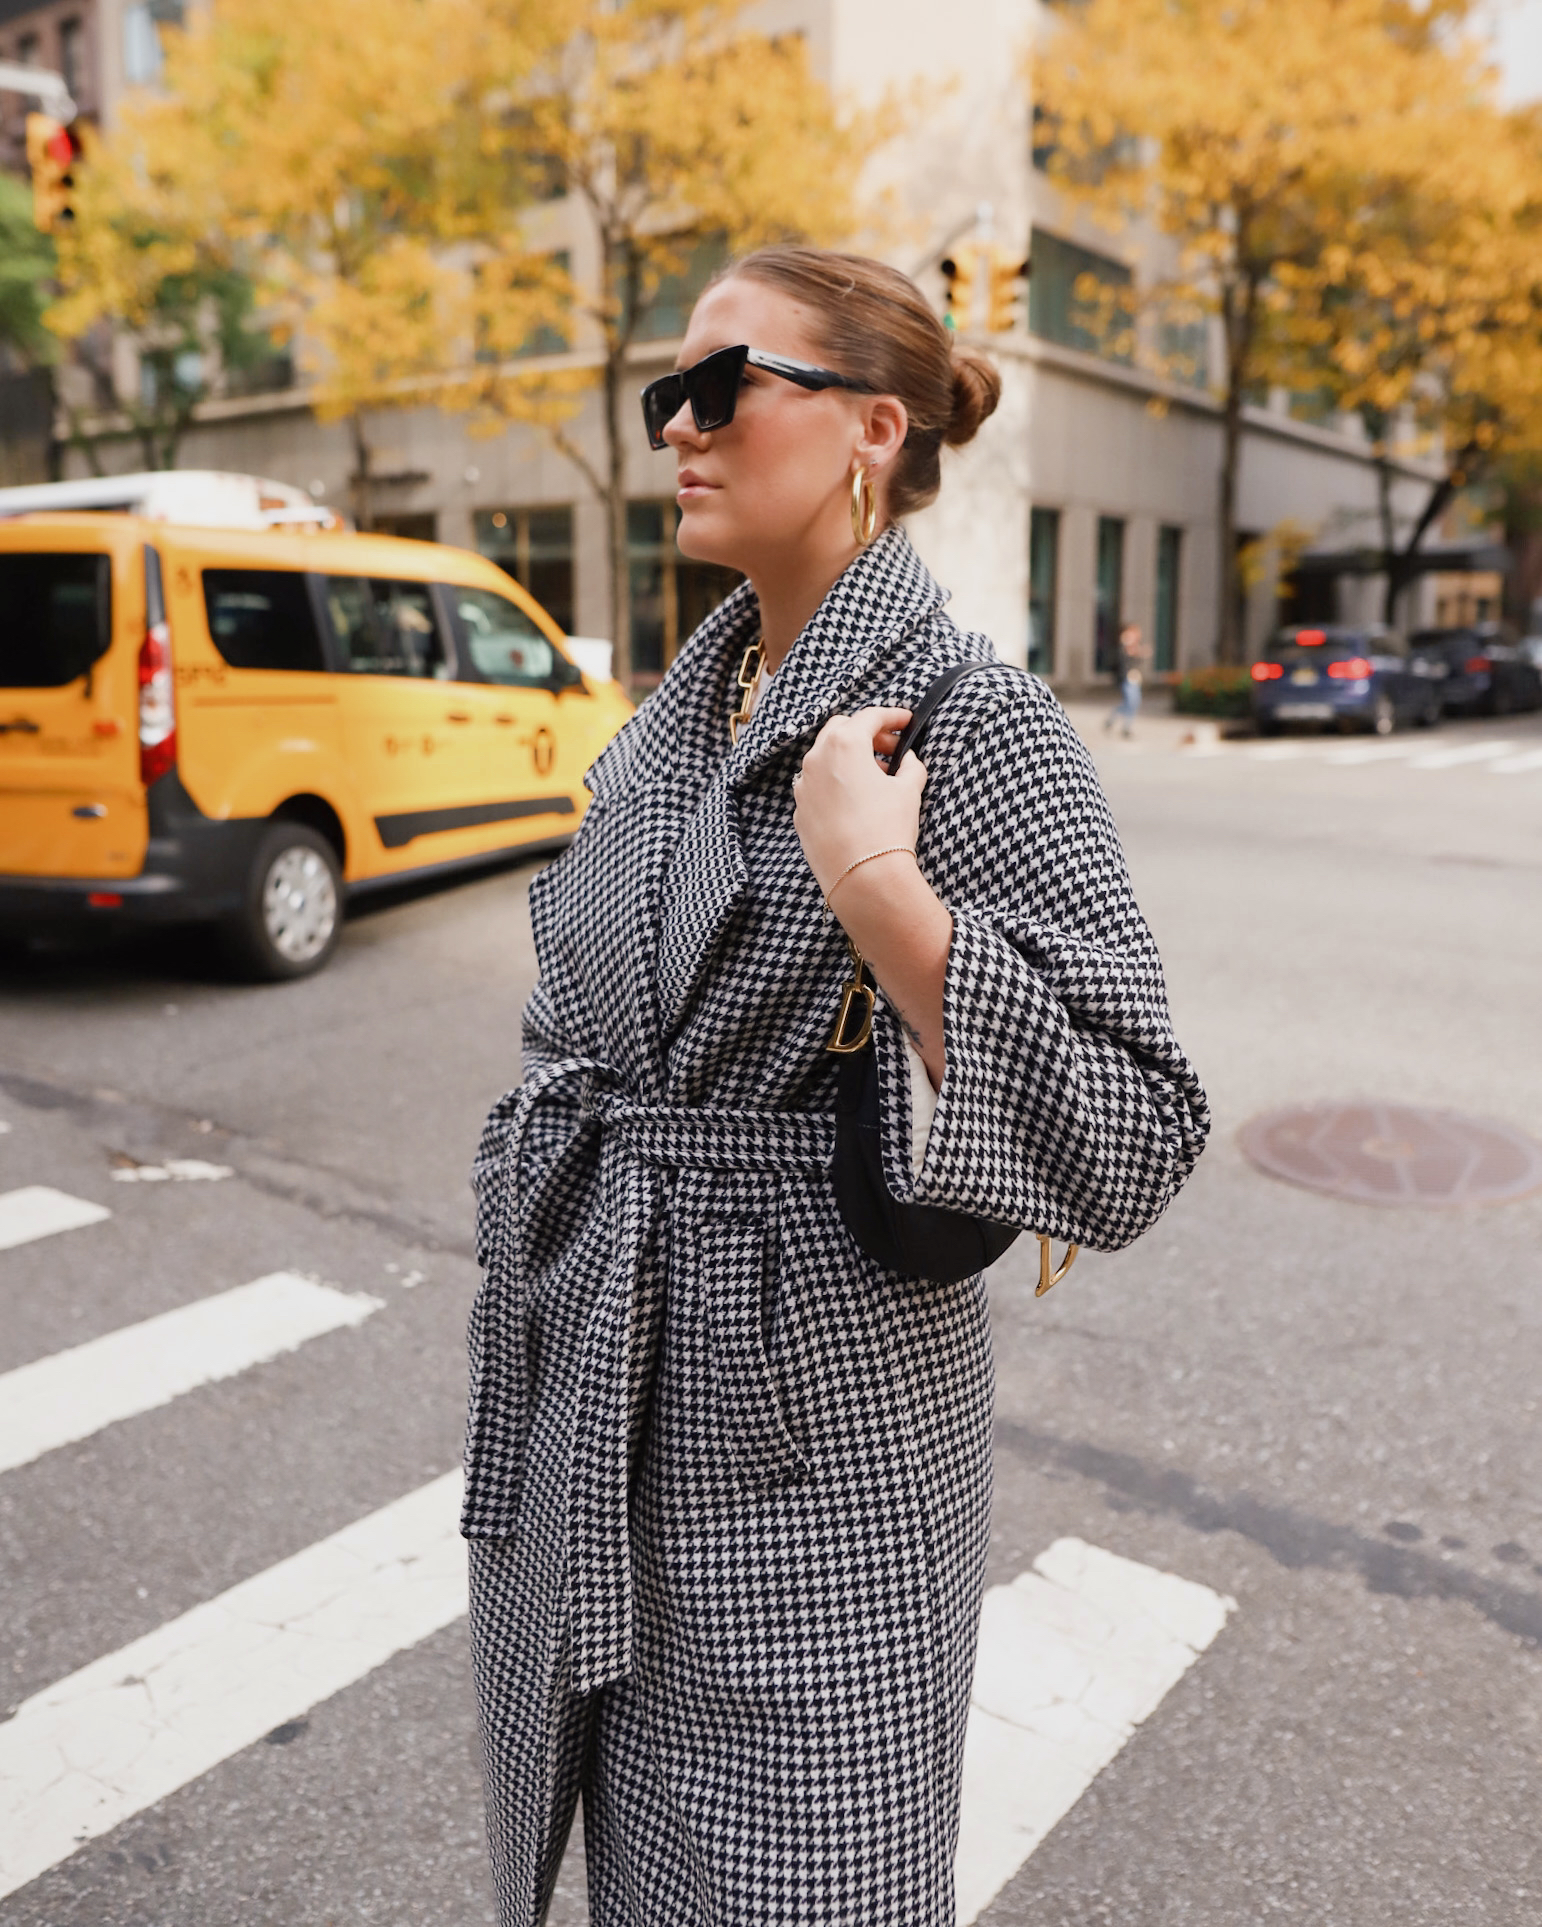 Anna standing in New York City street with gray coat and sunglasses on with yellow taxi in background.